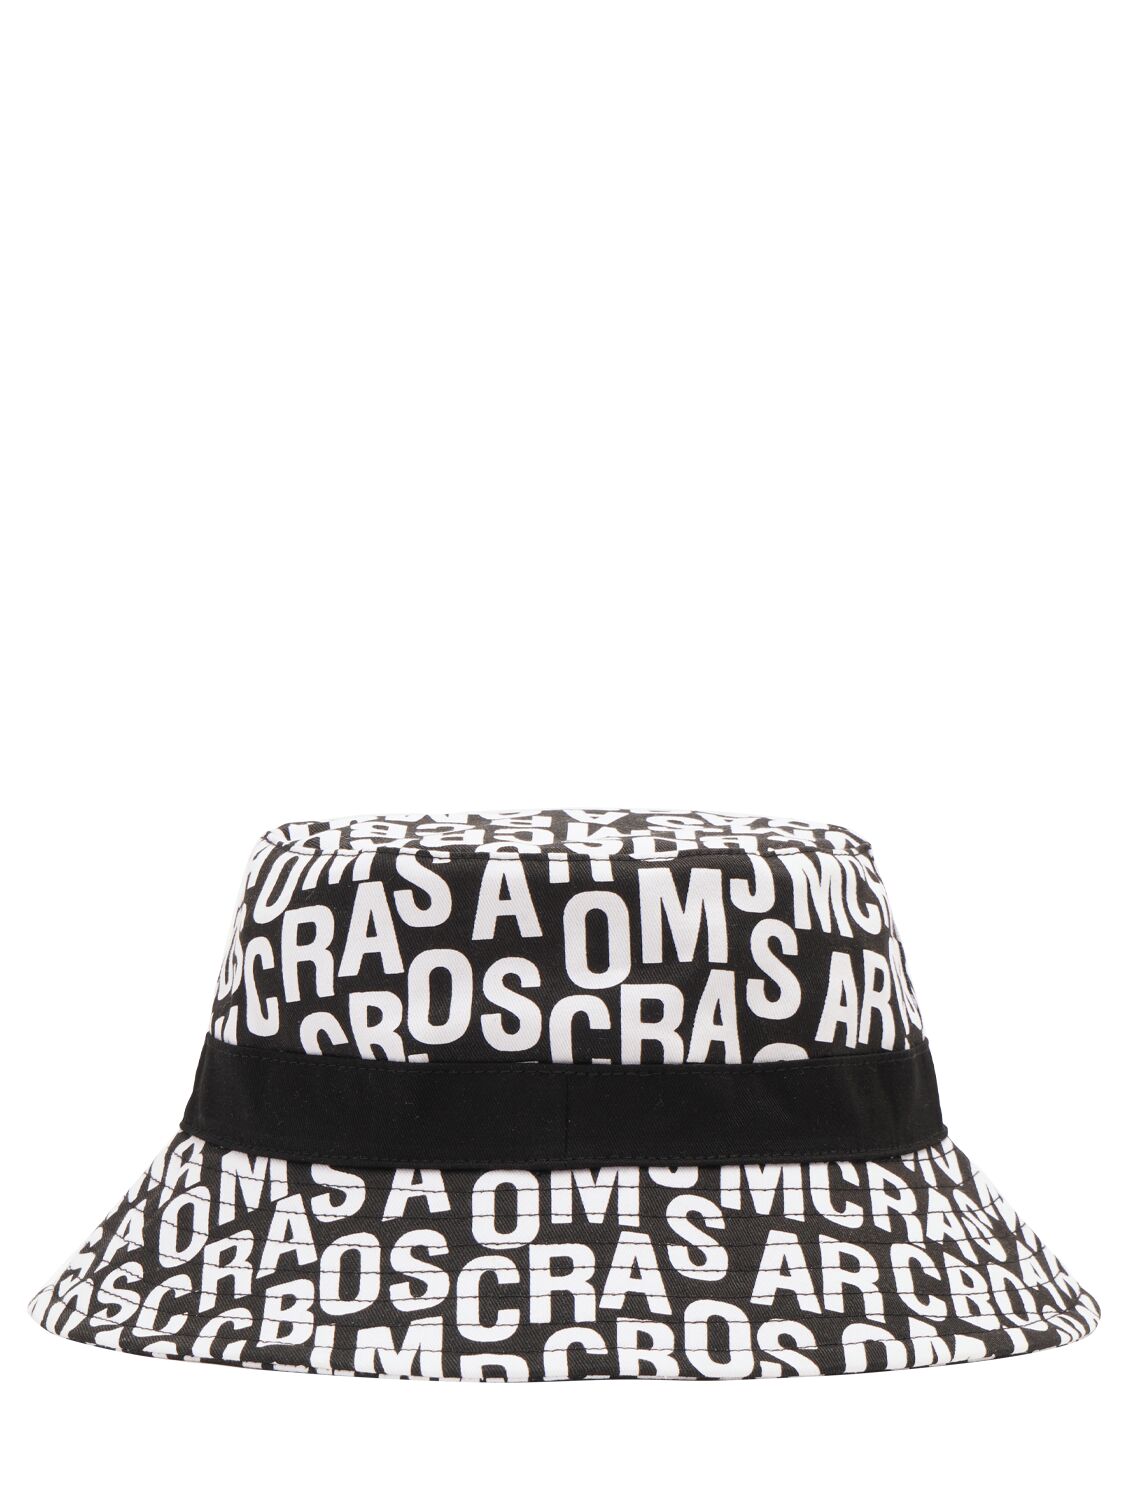 Shop Marc Jacobs All Over Logo Bucket Cotton Canvas Hat In Black,white